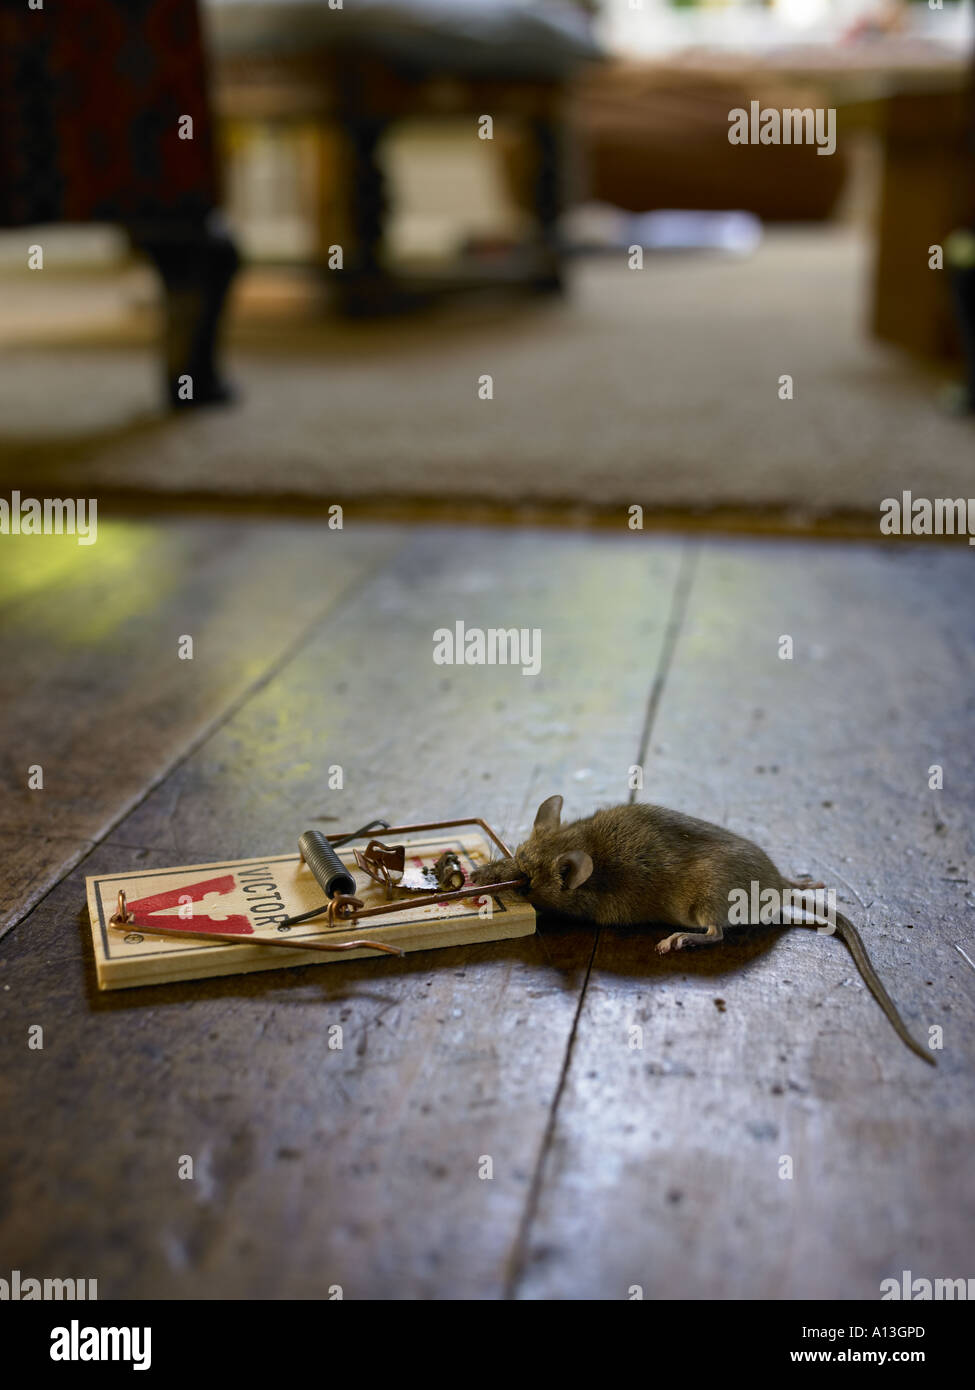 https://c8.alamy.com/comp/A13GPD/dead-mouse-caught-in-spring-trap-in-the-living-room-A13GPD.jpg